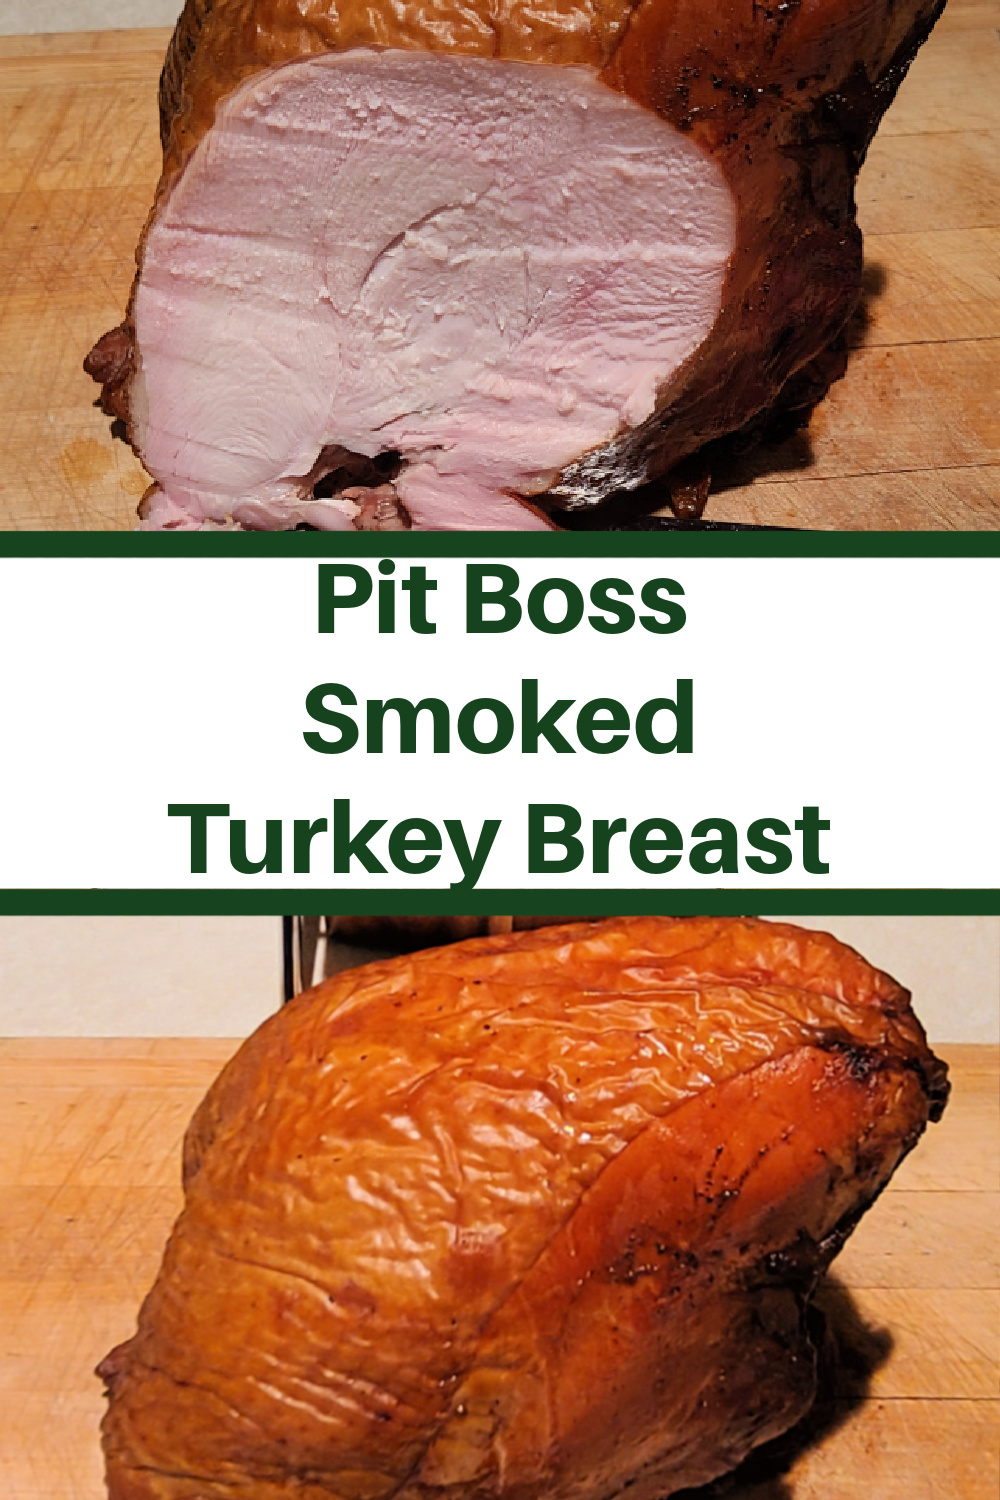 Pit Boss Smoked Turkey Breast Recipe with Brine Recipe is perfect for holiday dinners or special occasions! The brine makes the turkey flavorful and juicy!! Allowing the turkey breast to be in the brine for 24 hours allows for the meat to be juicy and absorb the flavor of the seasoning as well! The brine also adds flavor to the skin of the turkey when it is crispy as well.